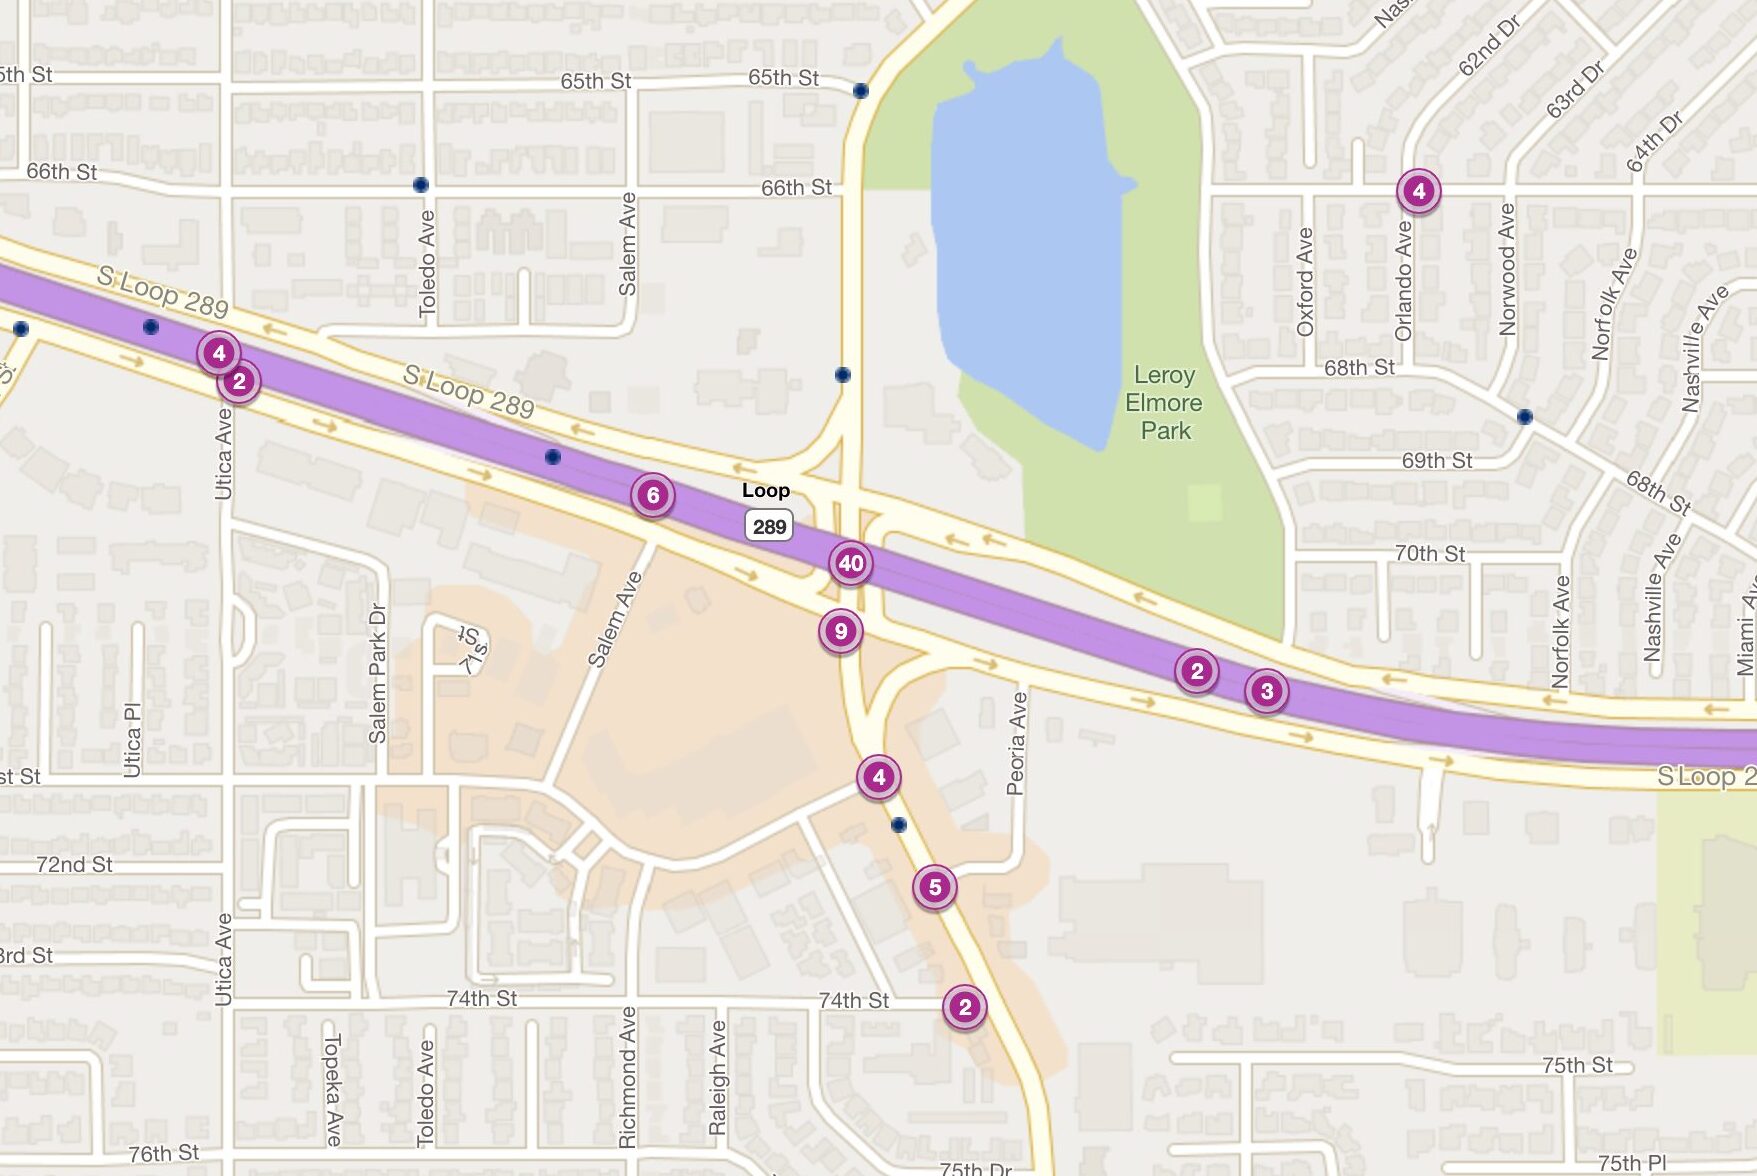 Cluster Map of 2023 Car Accidents at Loop 289 & Quaker Ave. (TXDOT)